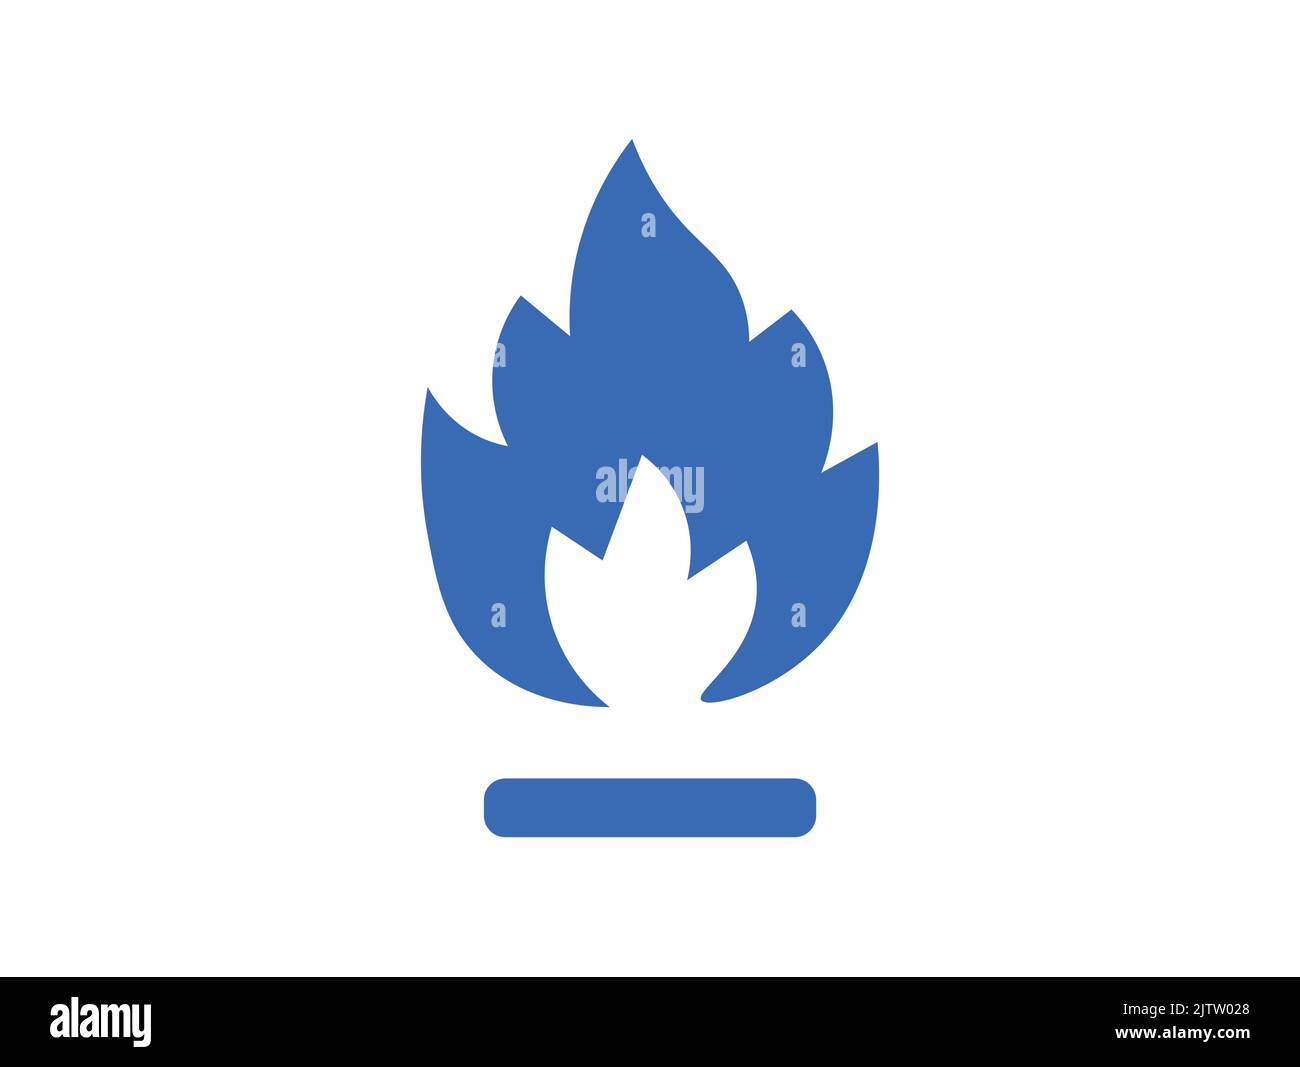 Natural gas flame vector icon. Concept of energy crisis, natural gas shortage, and lack of electricity power in Europe Stock Vector